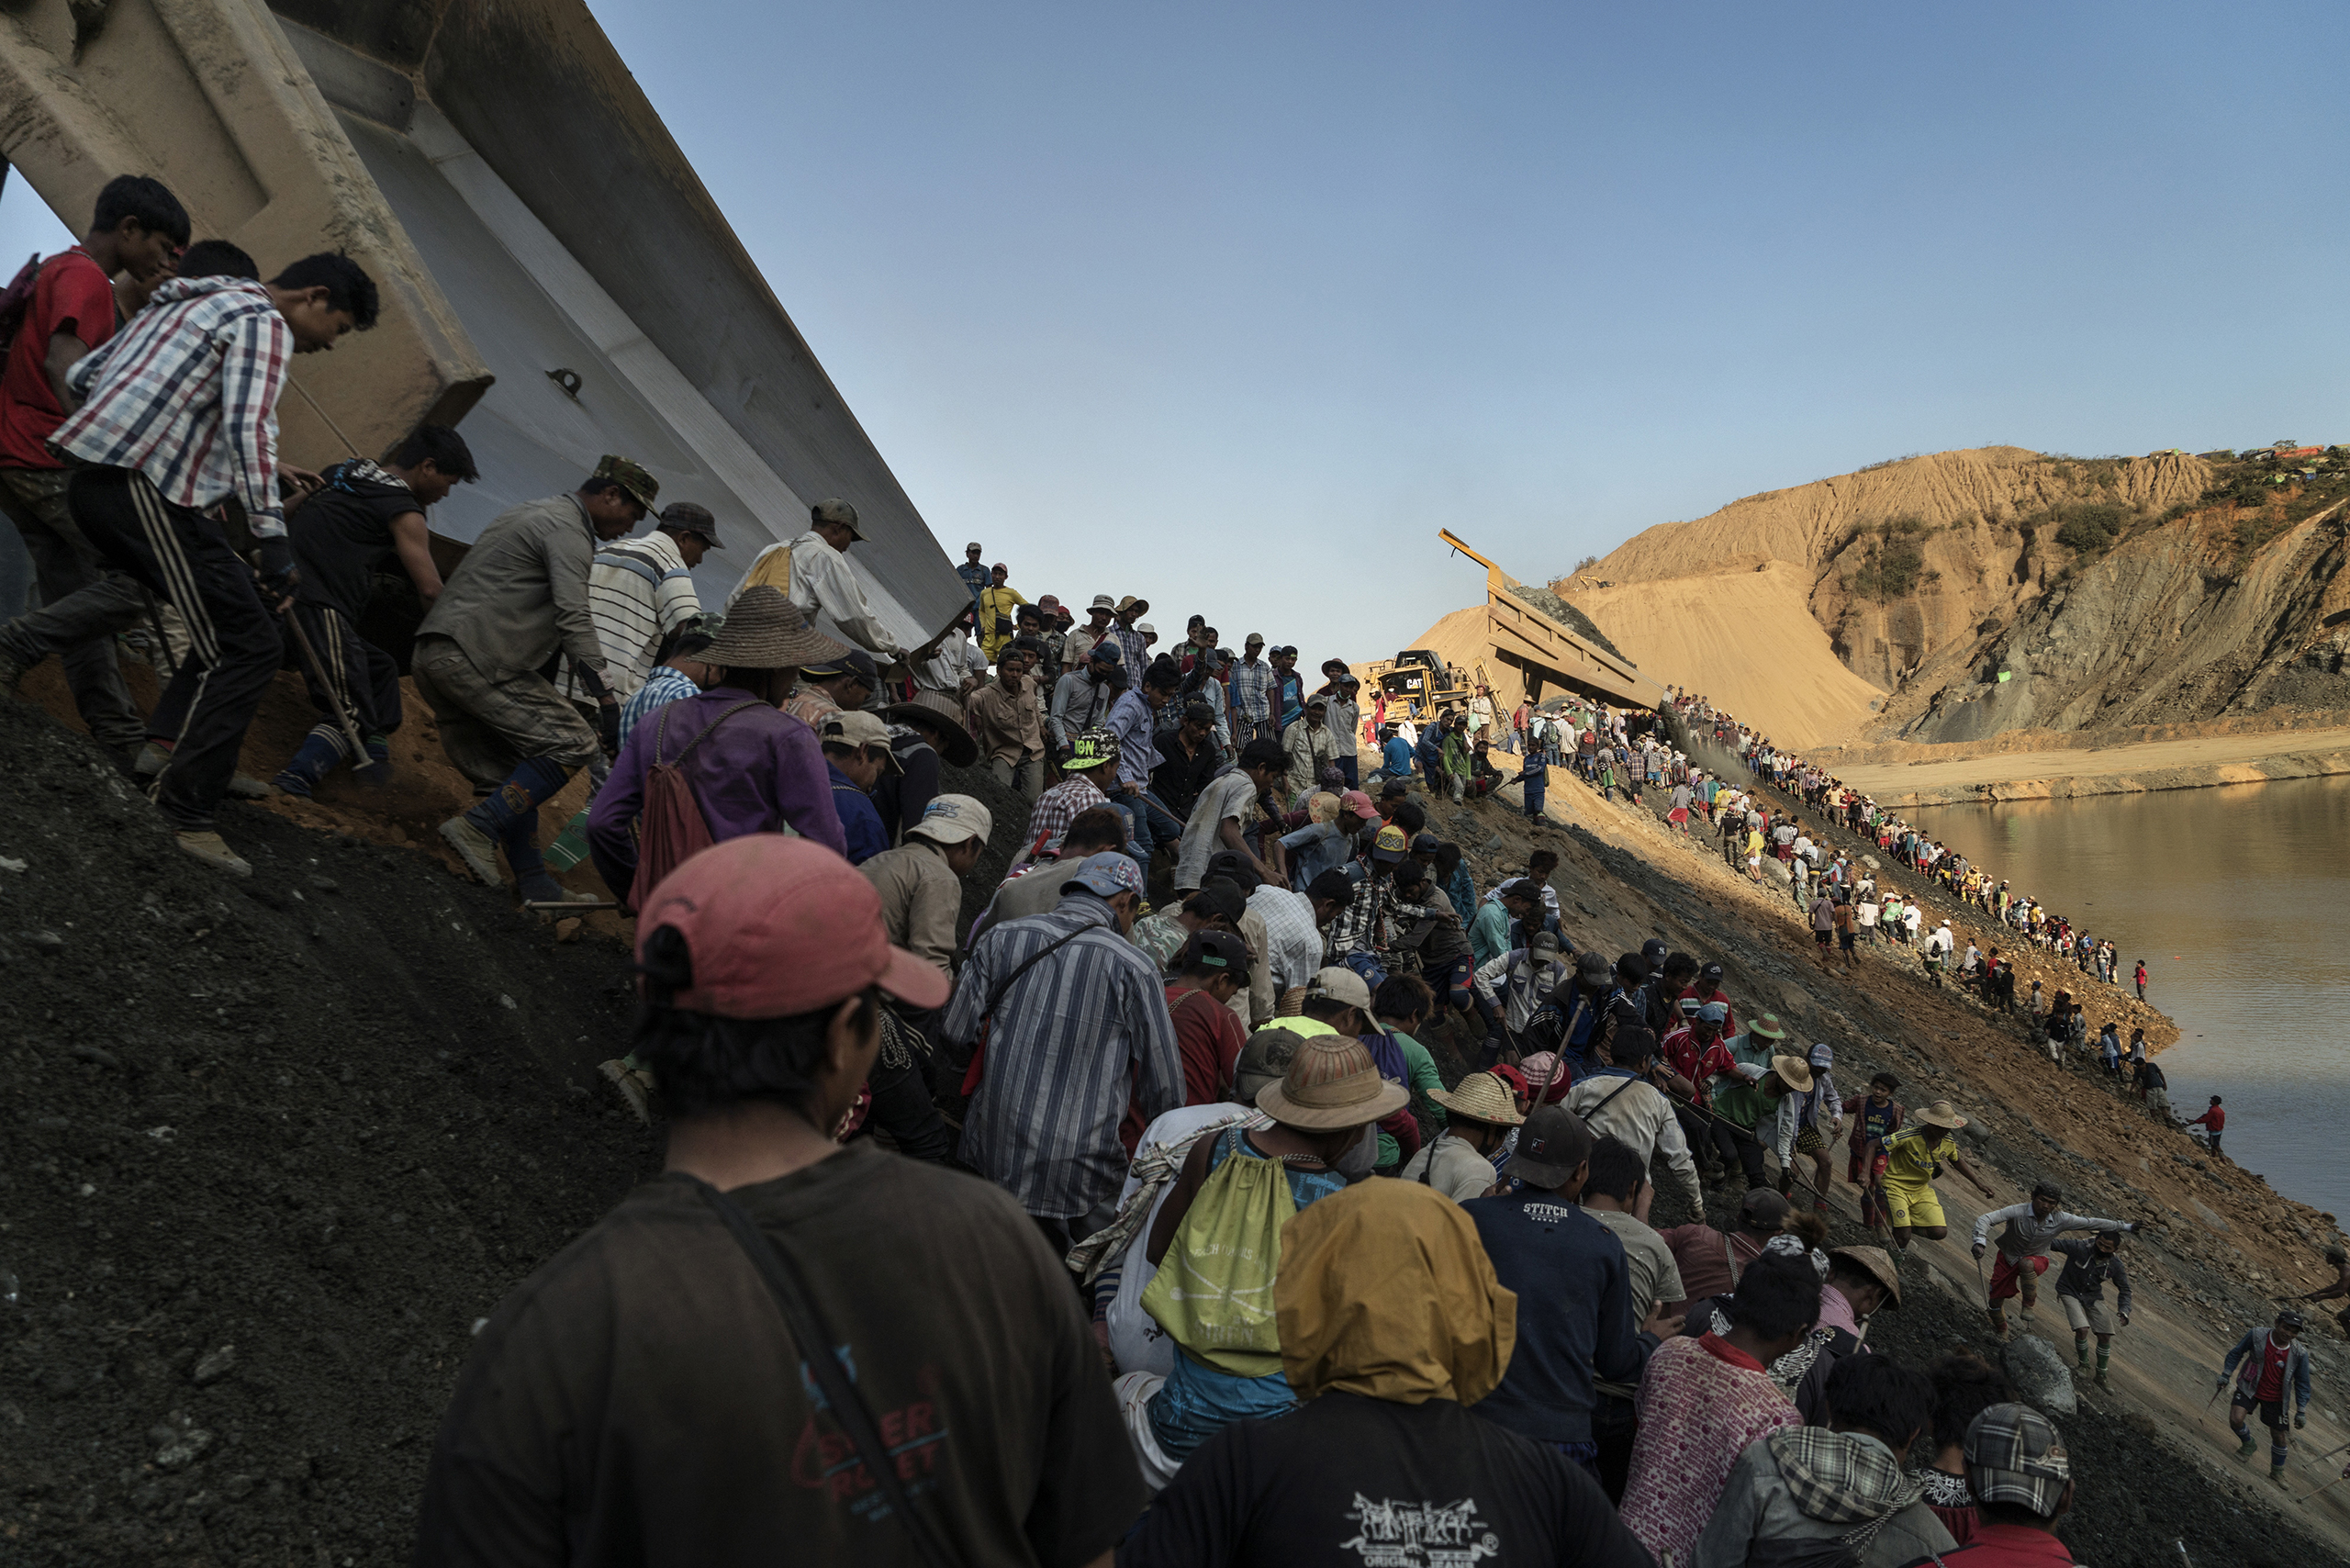 Freelance miners scramble down a hill at a mine in Hpakant, in the heart of Myanmar’s jade country, to scavenge for jade stones. (Adam Dean—Panos for TIME)